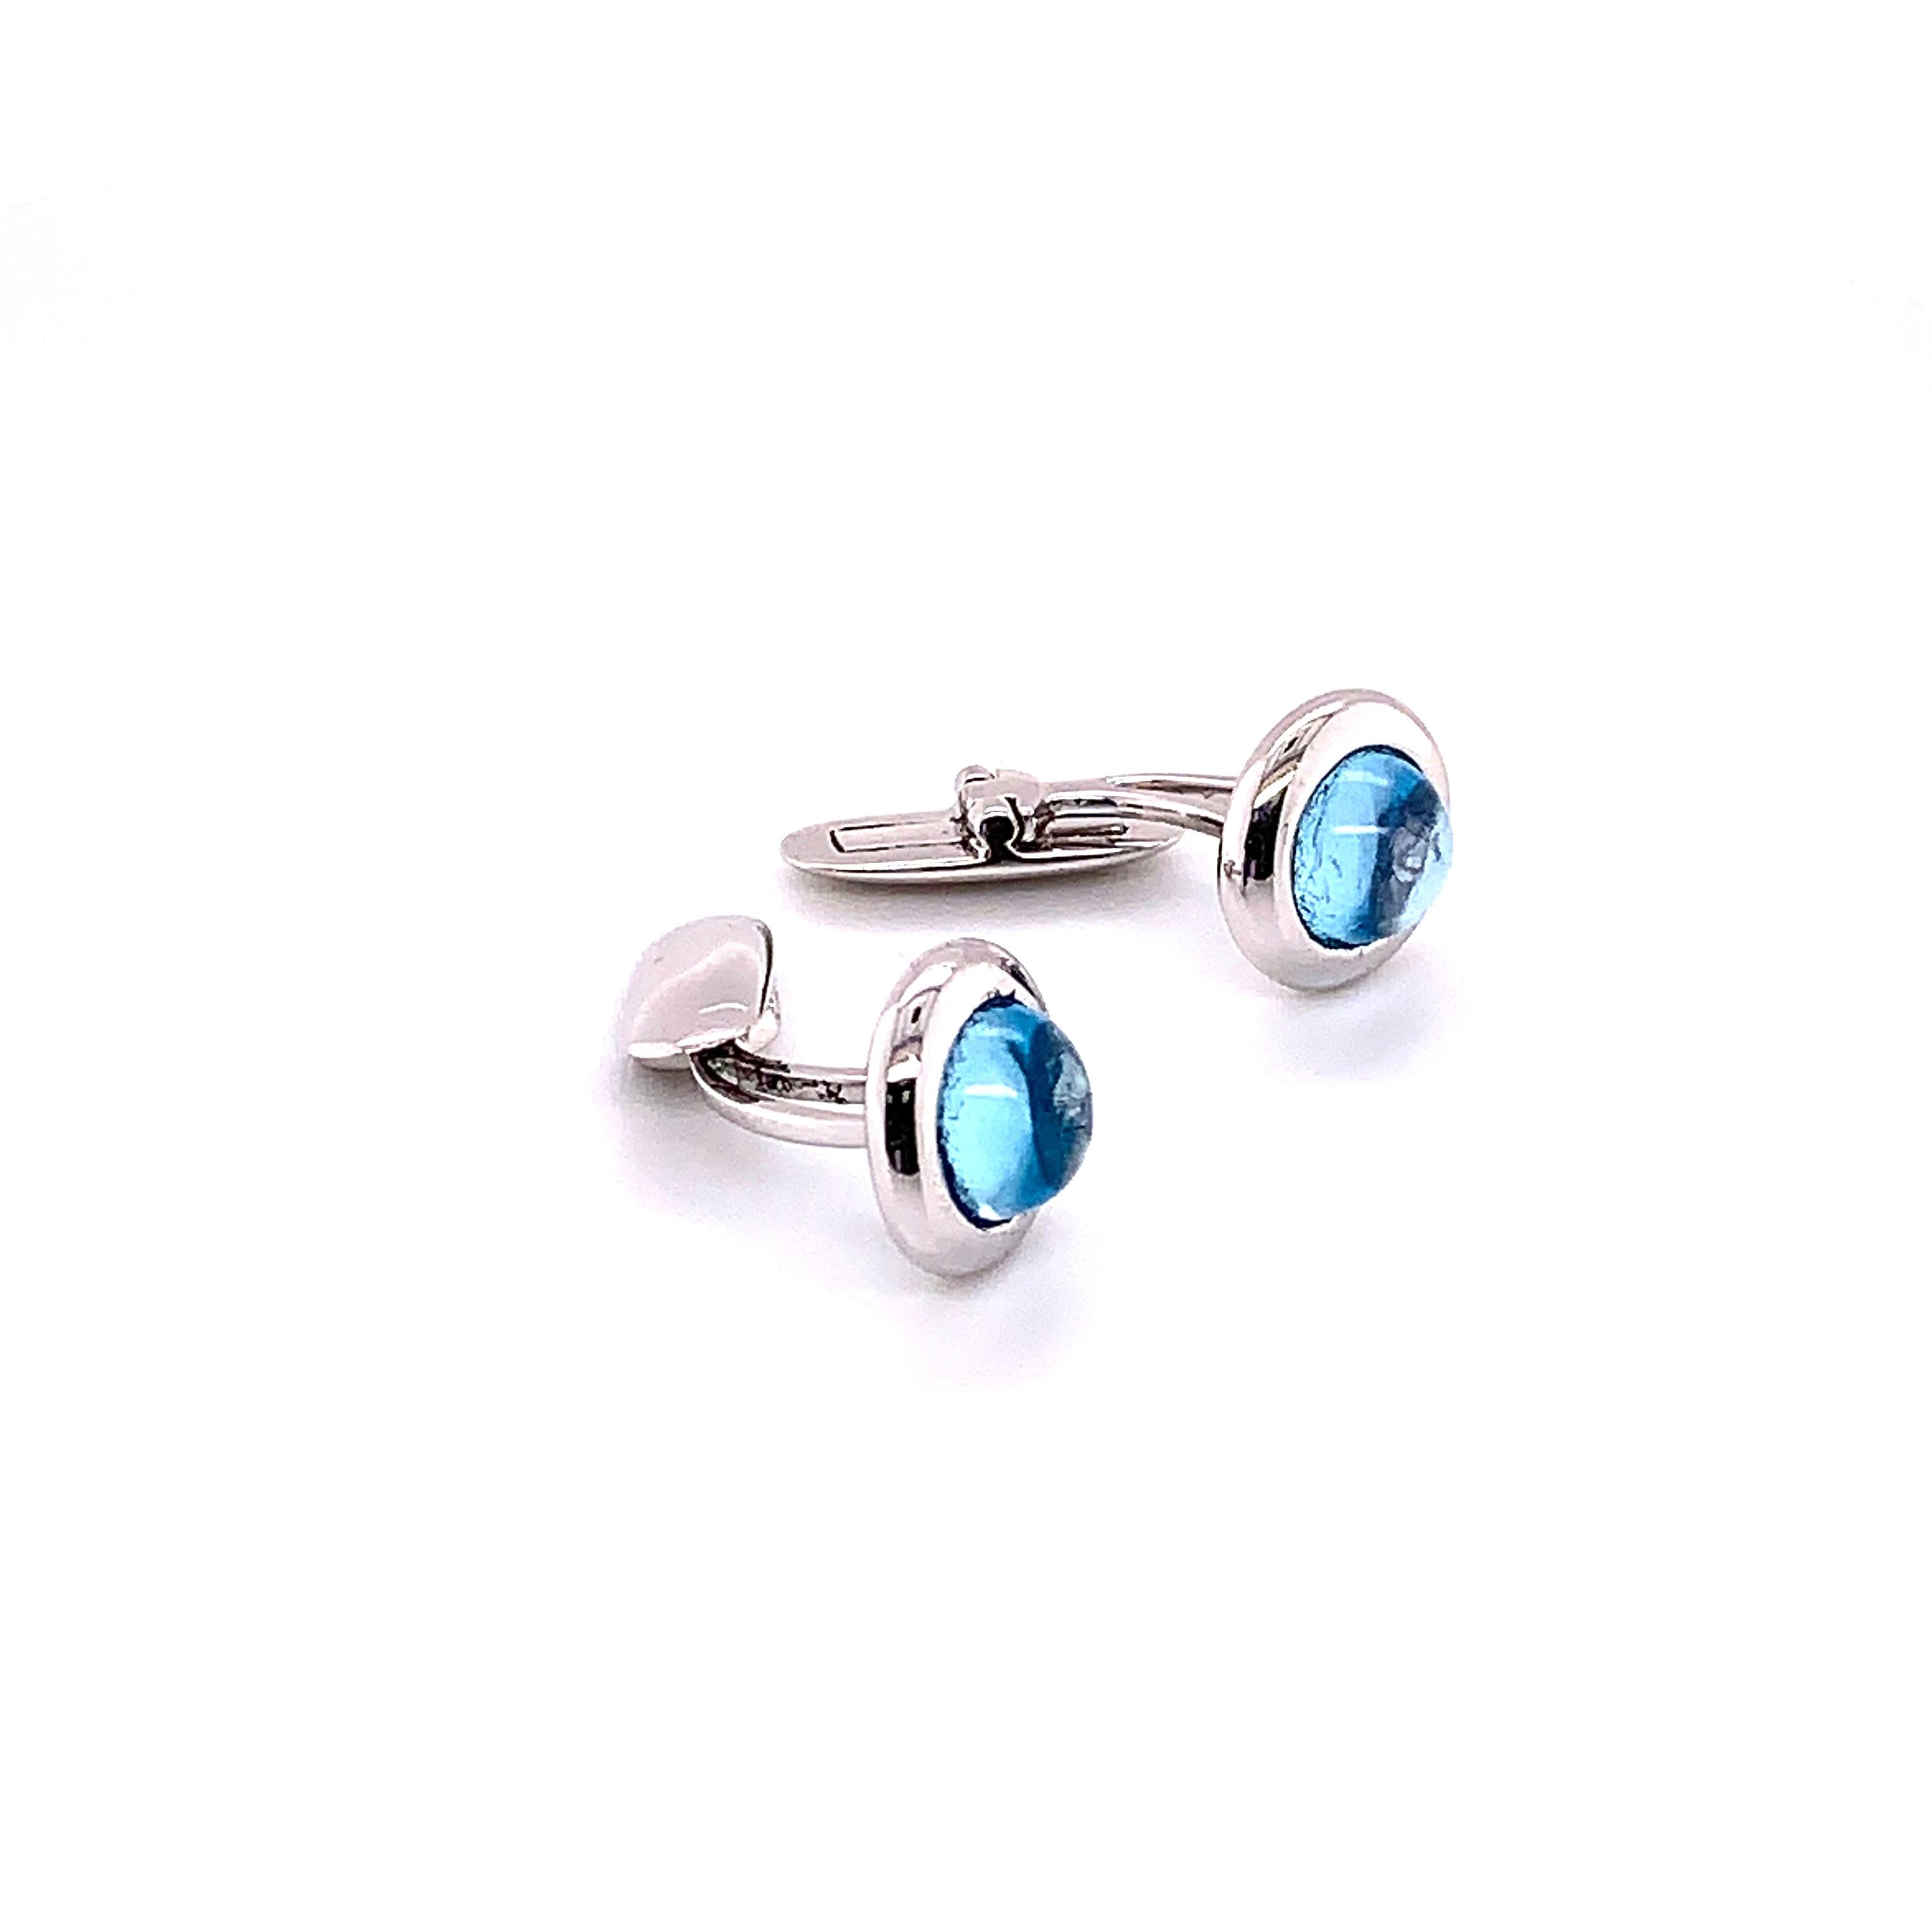 The richness of the blue Topaz is highlighted in these stunning cuff links. Each cuff link comprising a 4.63 carat topaz stone. This Cuff link featuring 18K White Gold and weighing 7.81 grams.

Color stone and Gold breakdown:
Topaz - 4.63 Carat
Gold